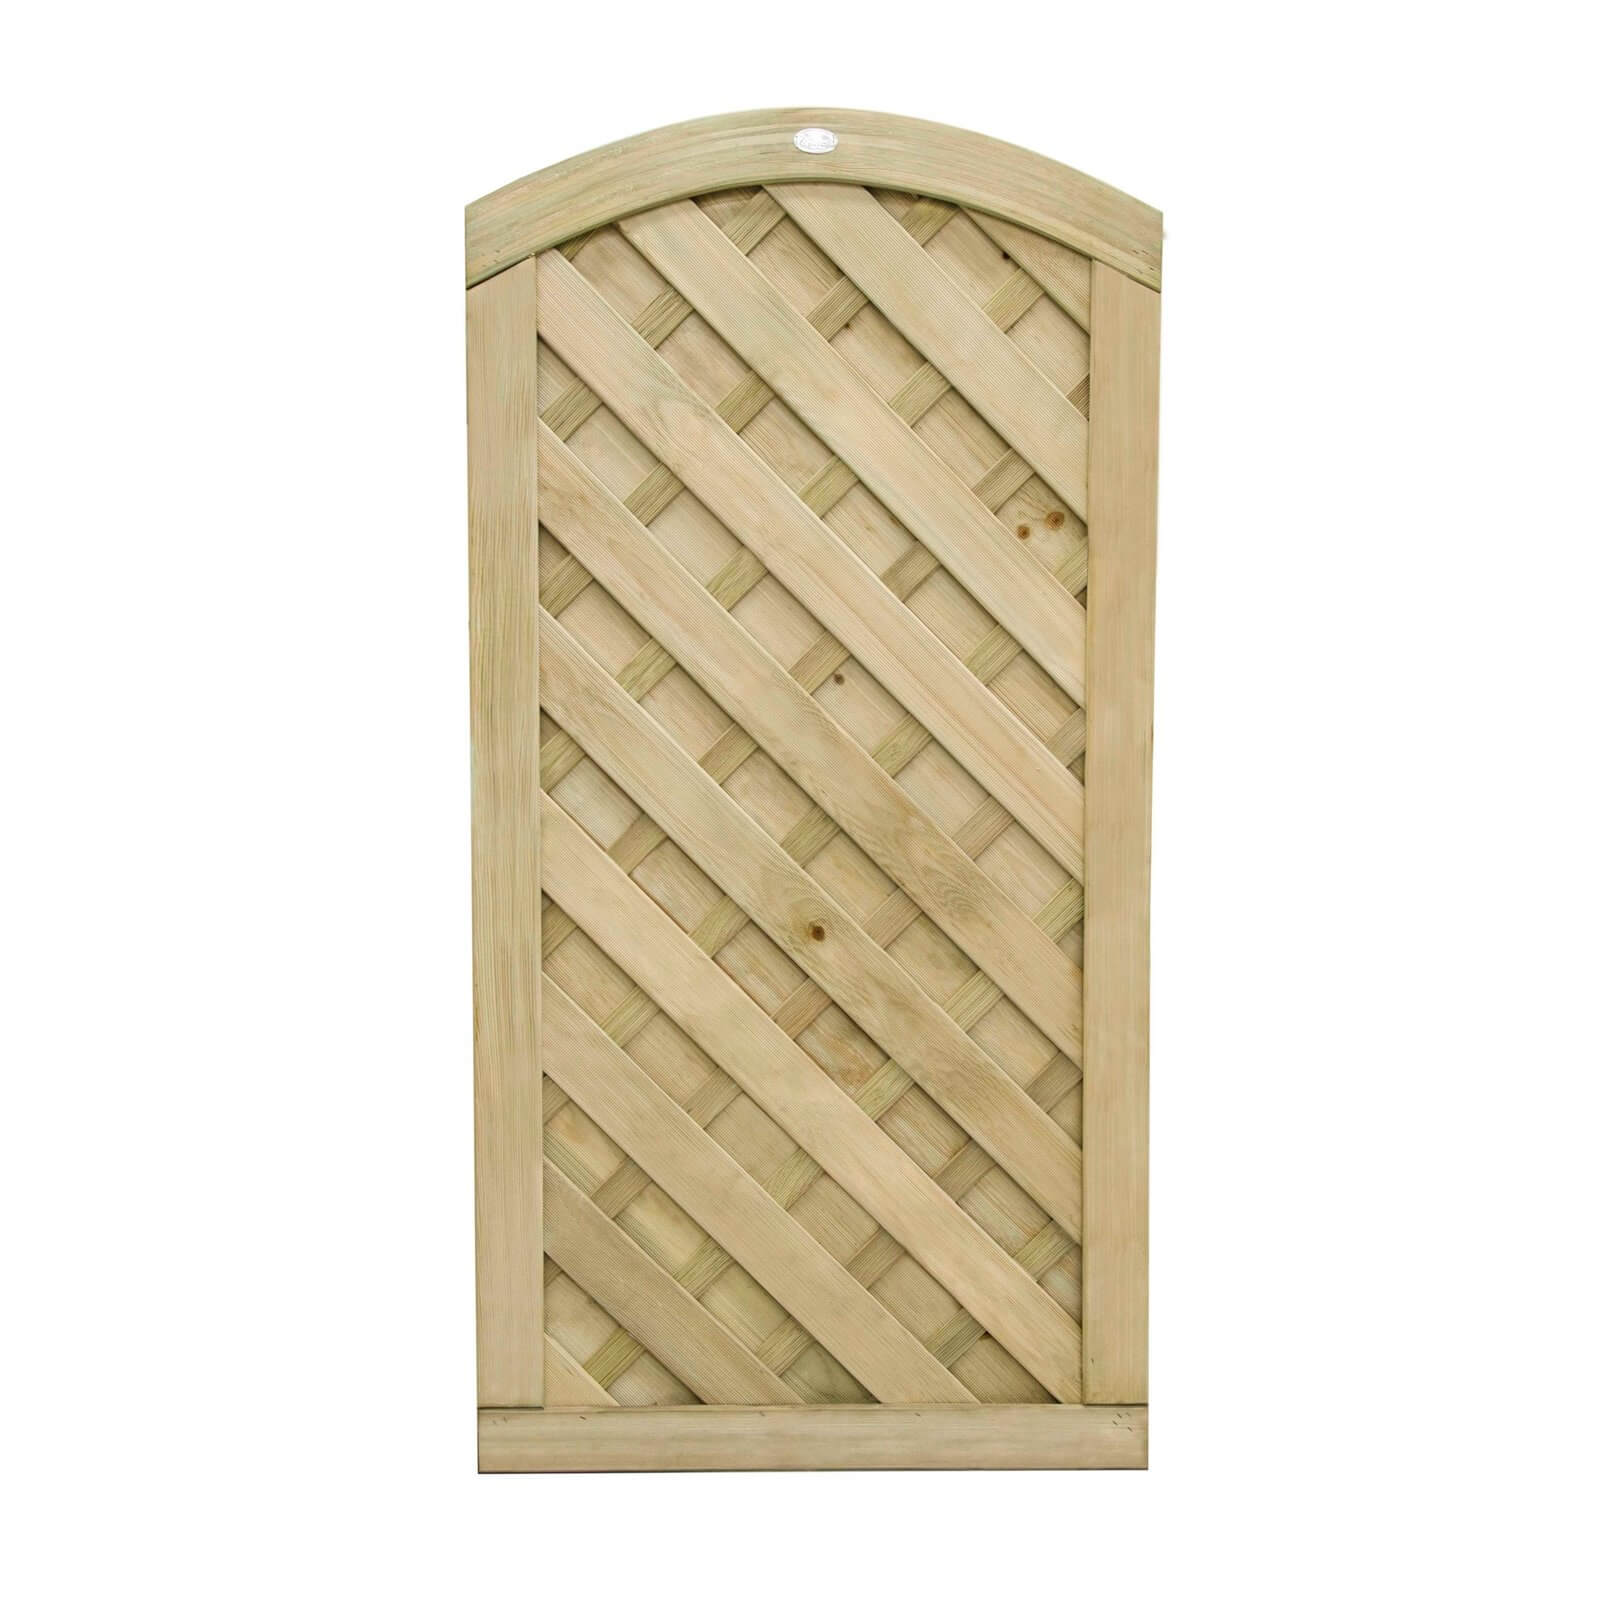 Europa Dome Gate - 6ft